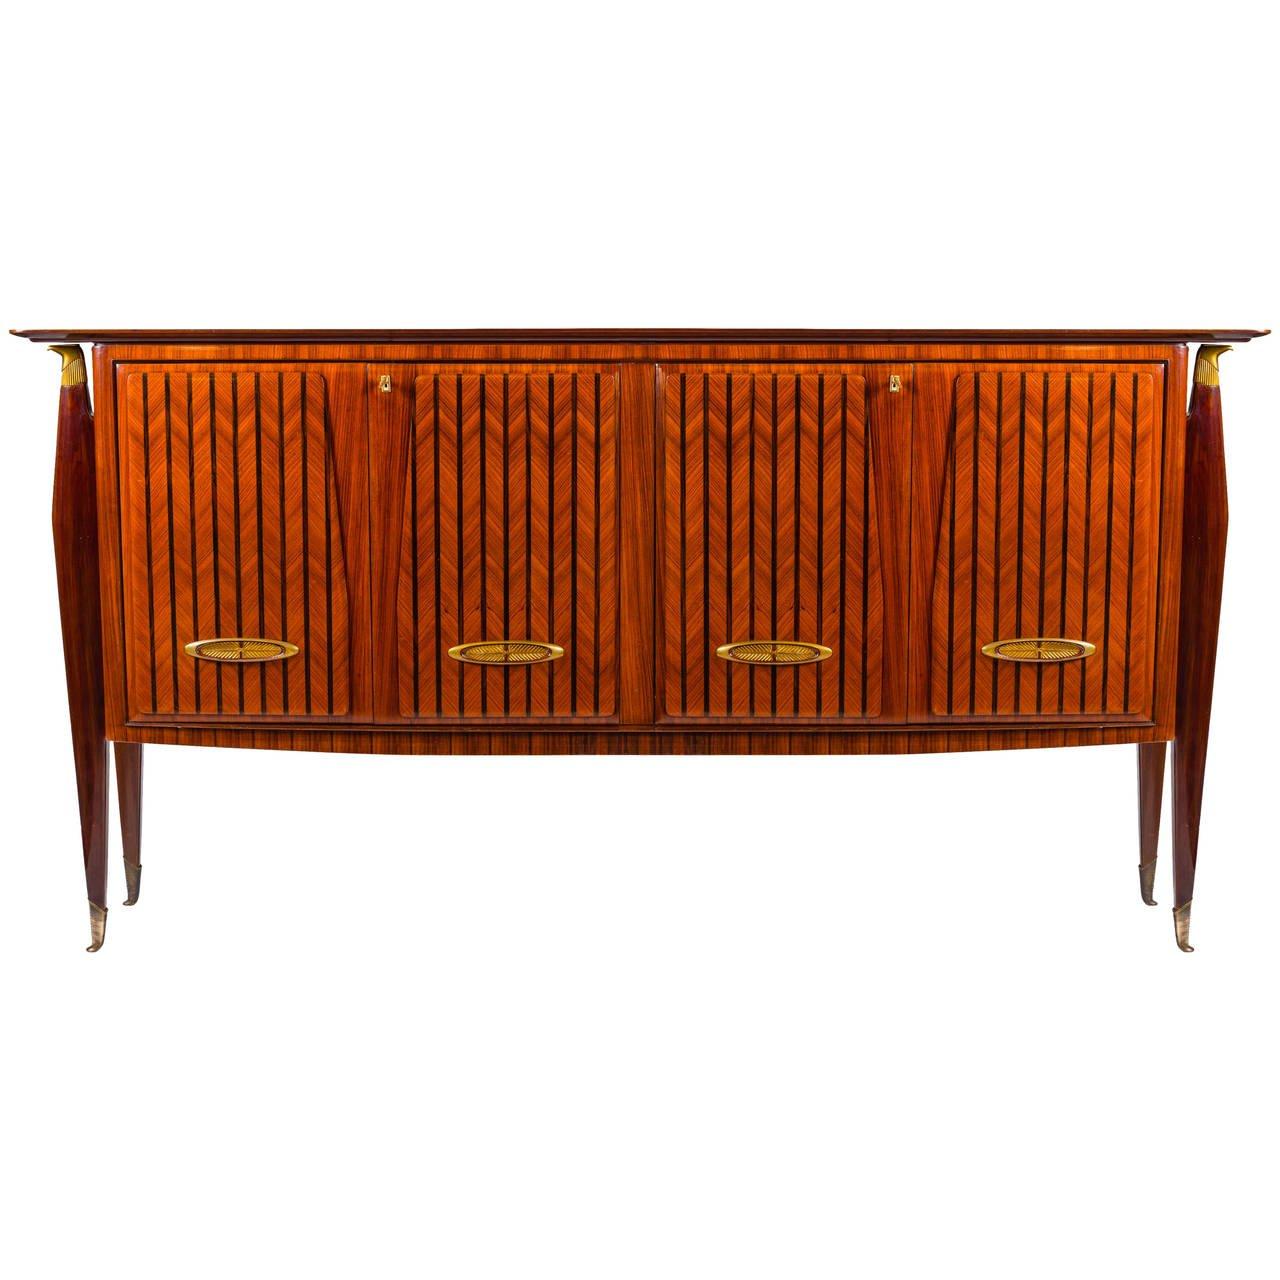 Bronze Italian Design Midcentury Console Table in the Style of Paolo Buffa, 1950s For Sale